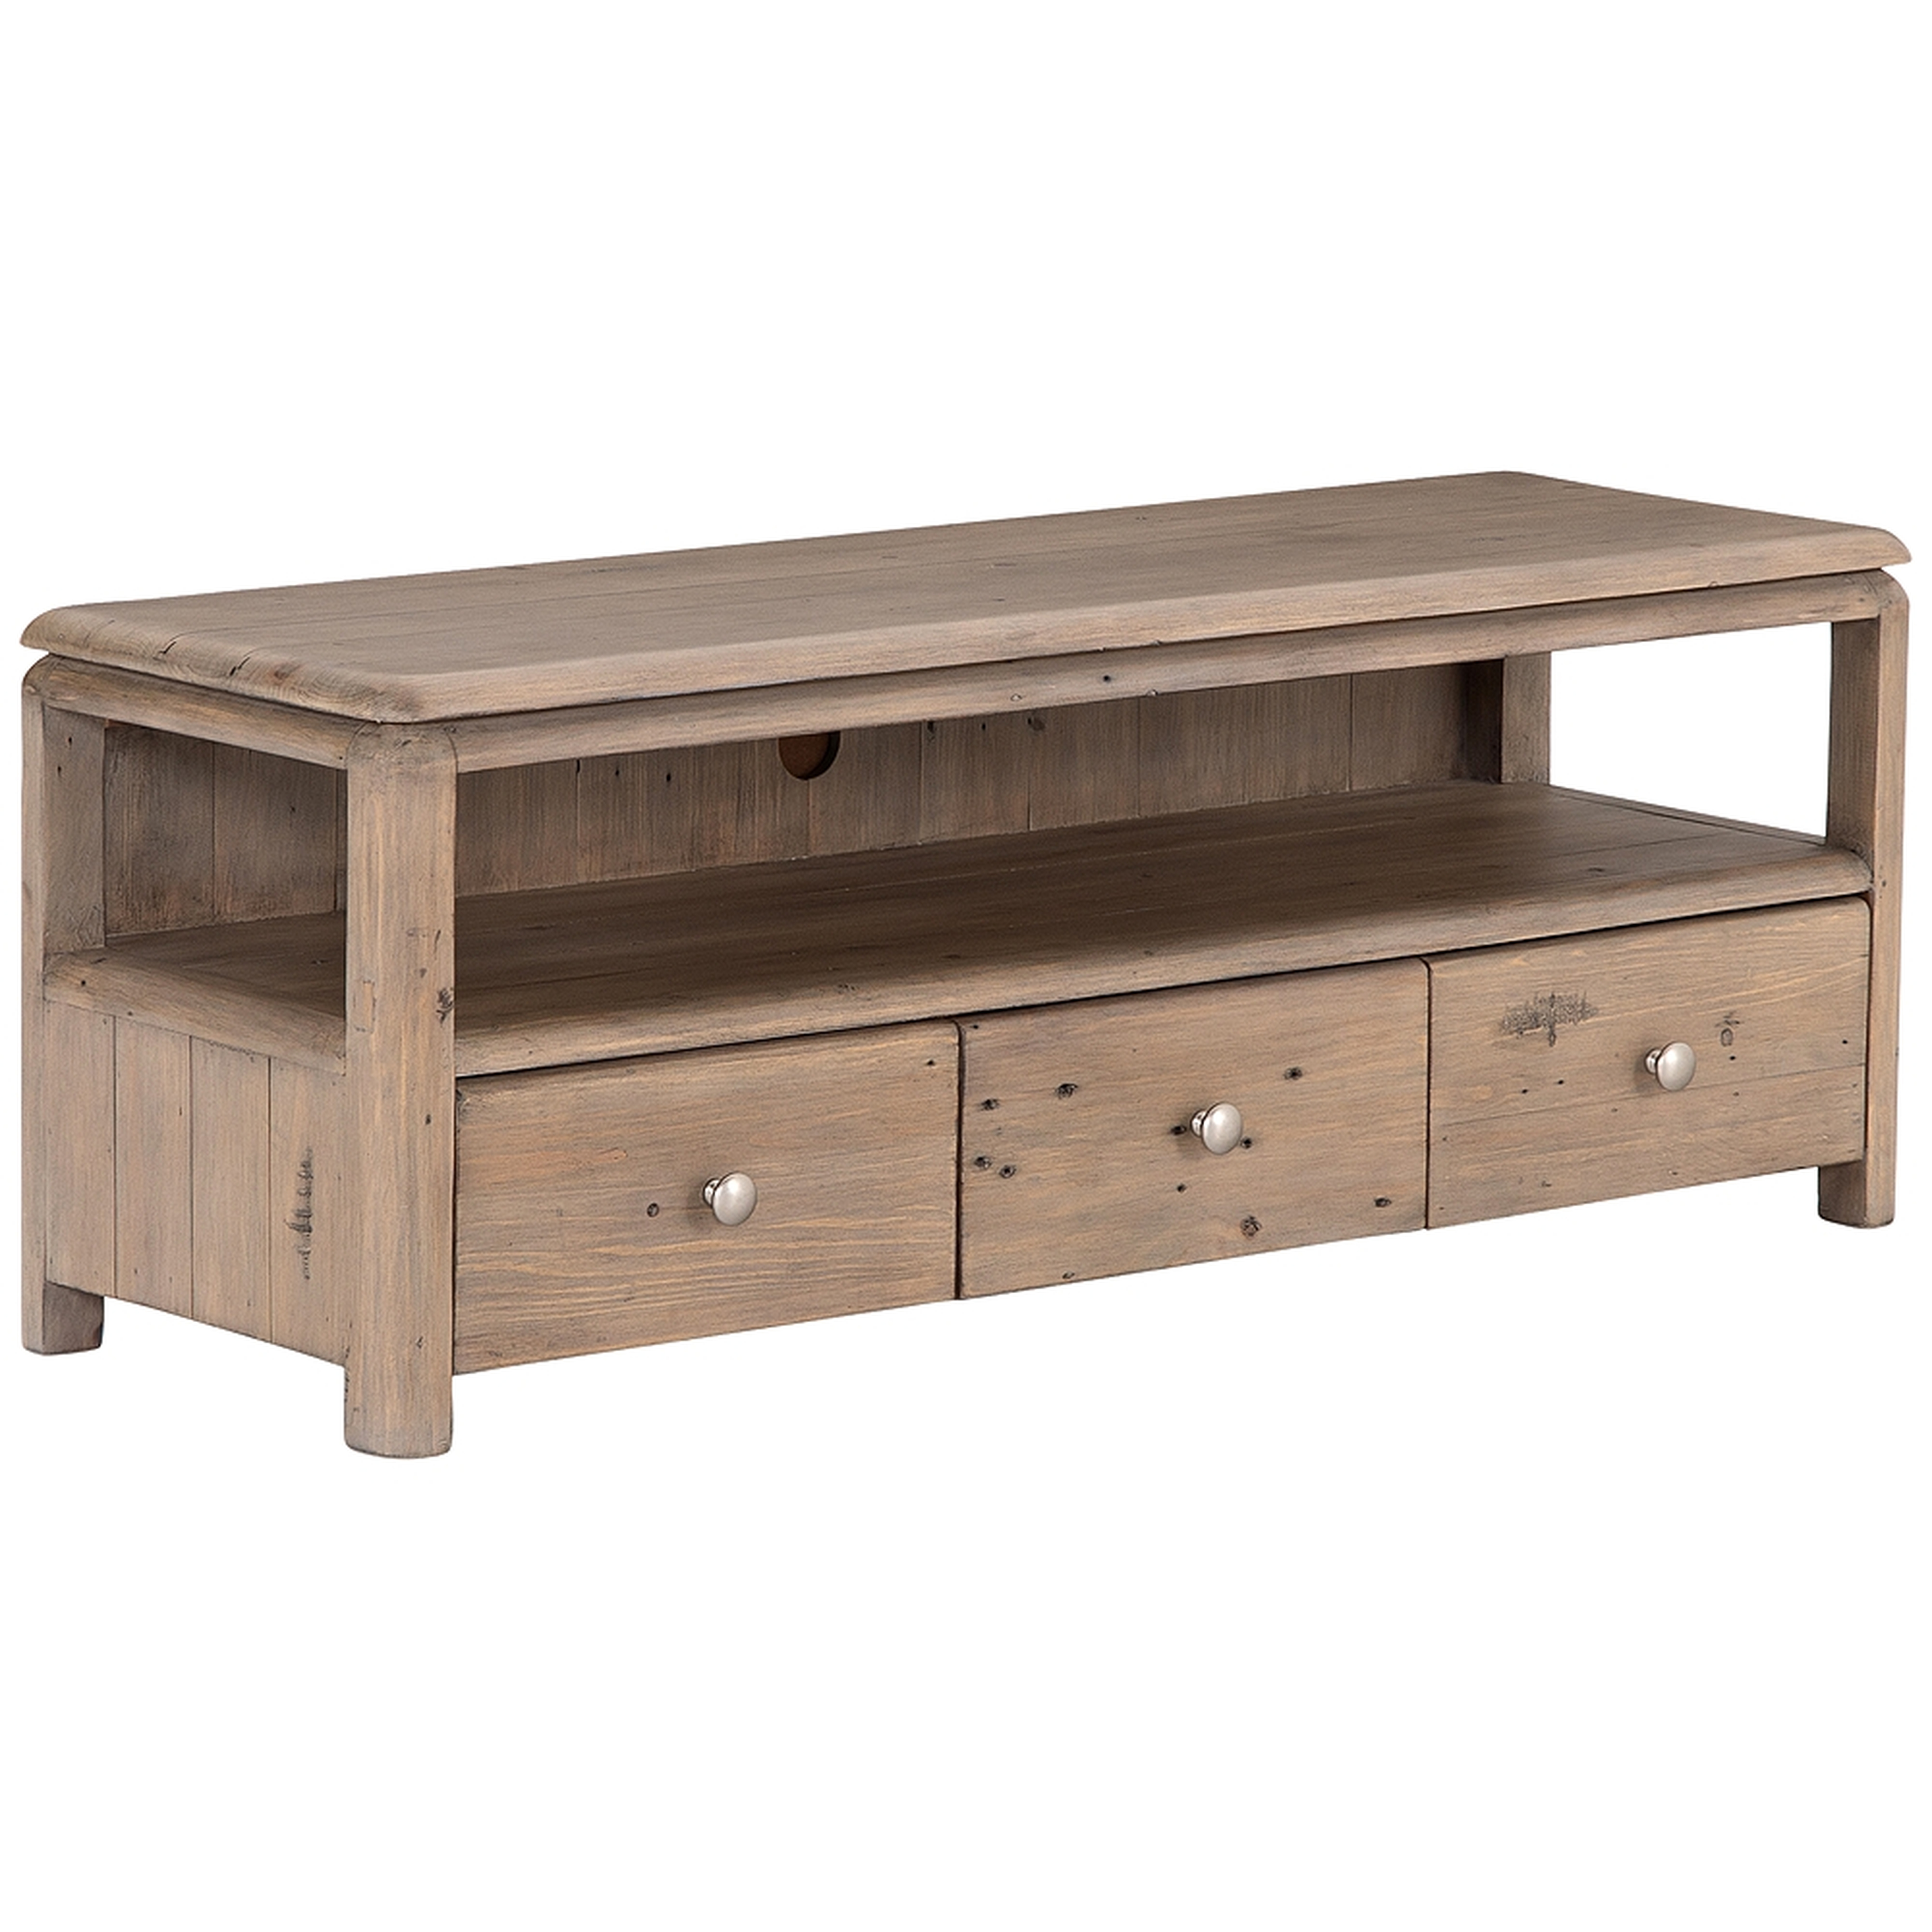 Monroe 47 1/4" Wide Rustic Wood 3-Drawer Media Console - Style # 97R12 - Lamps Plus